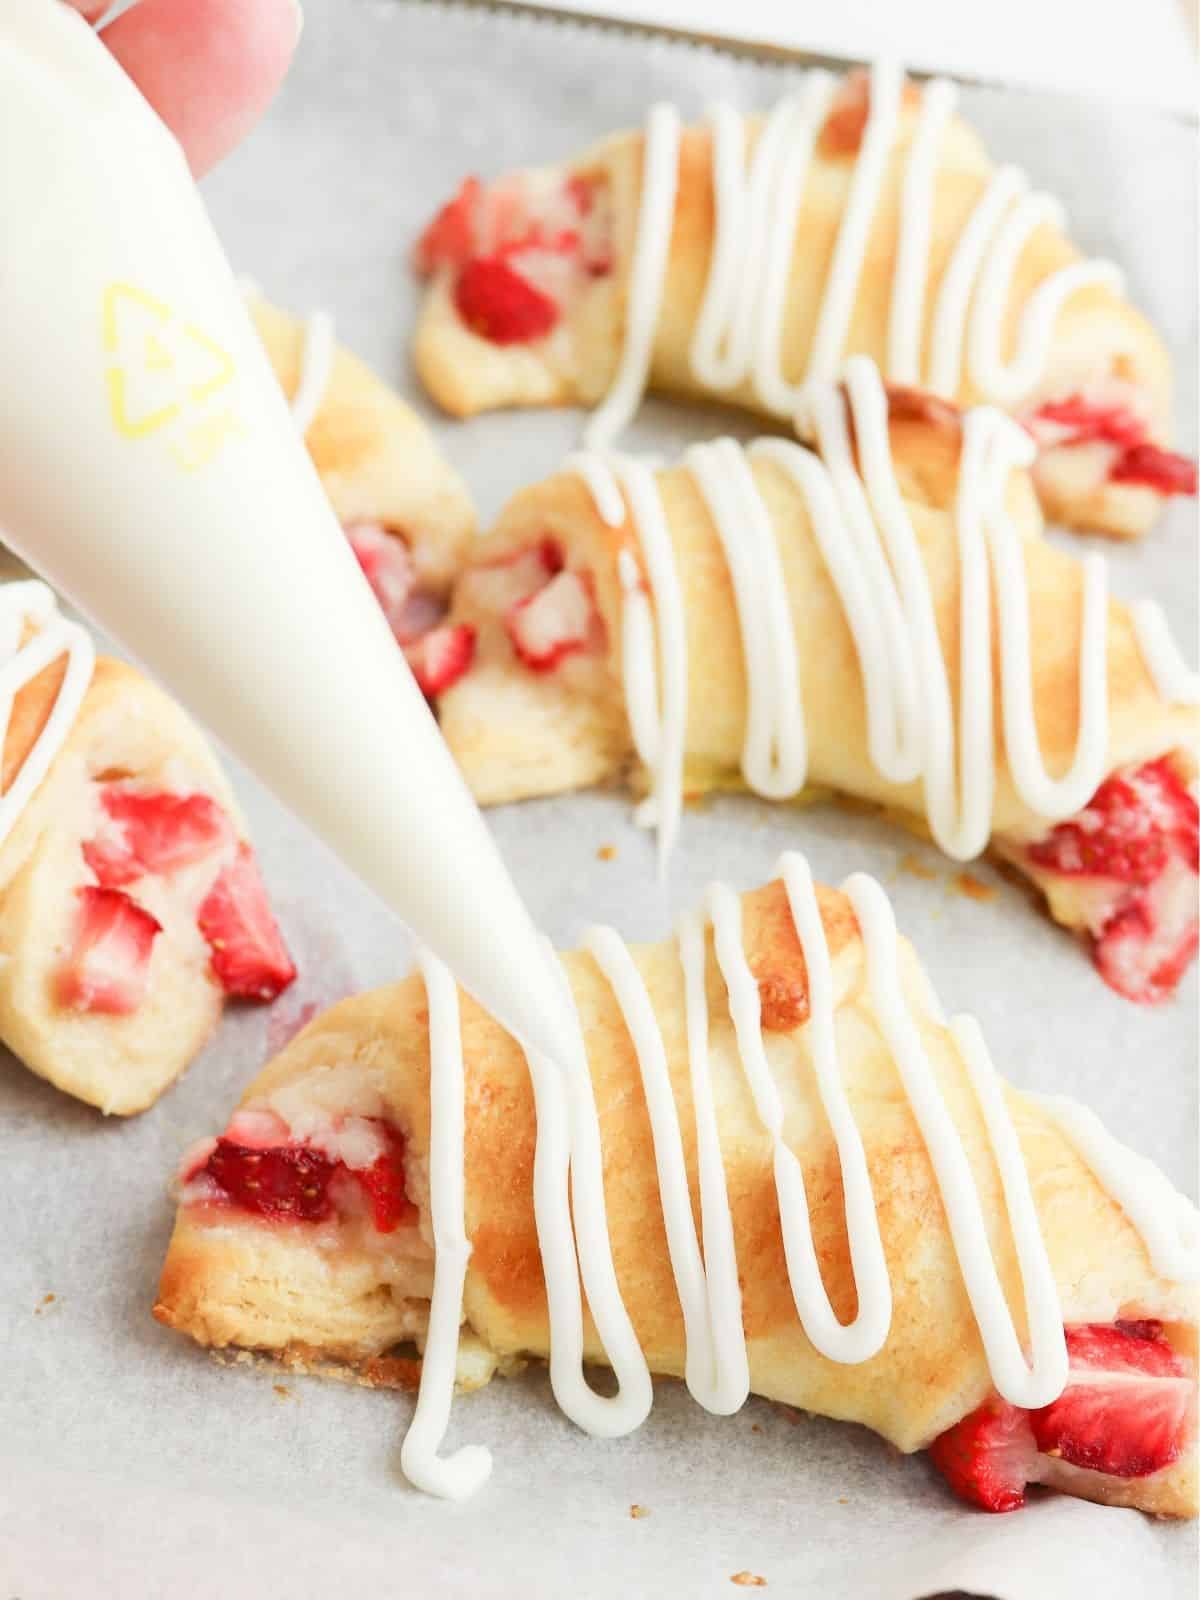 Drizzle powdered sugar glaze on top of crescent rolls filled with strawberries.